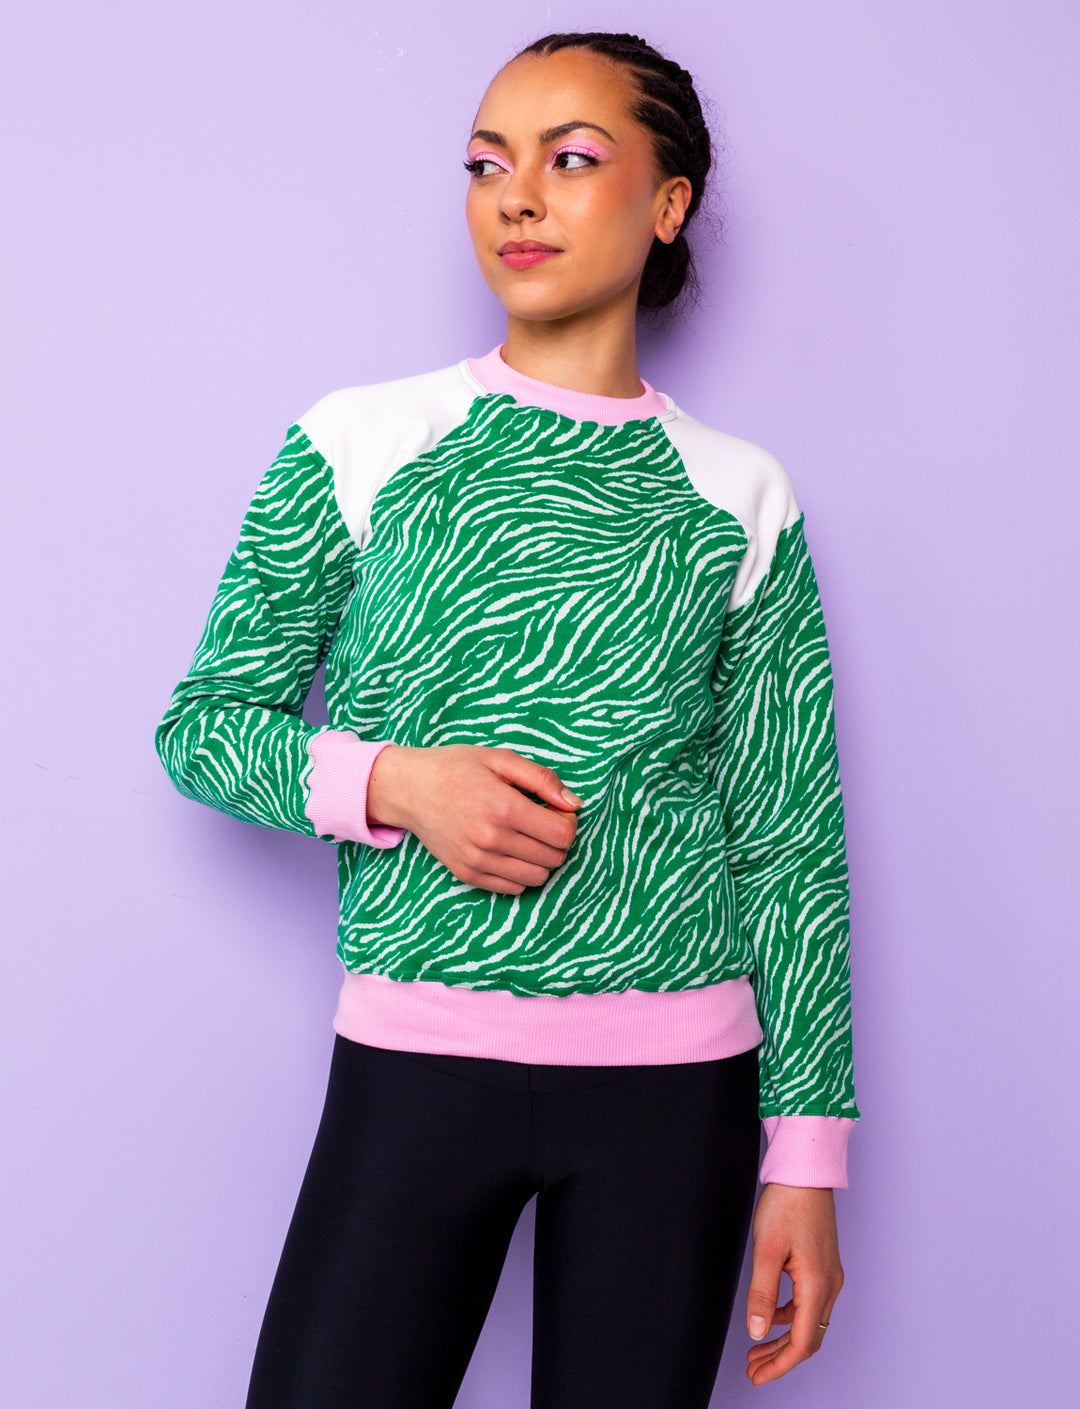 woman wearing a green zebra print sweatshirt with pink and white panels